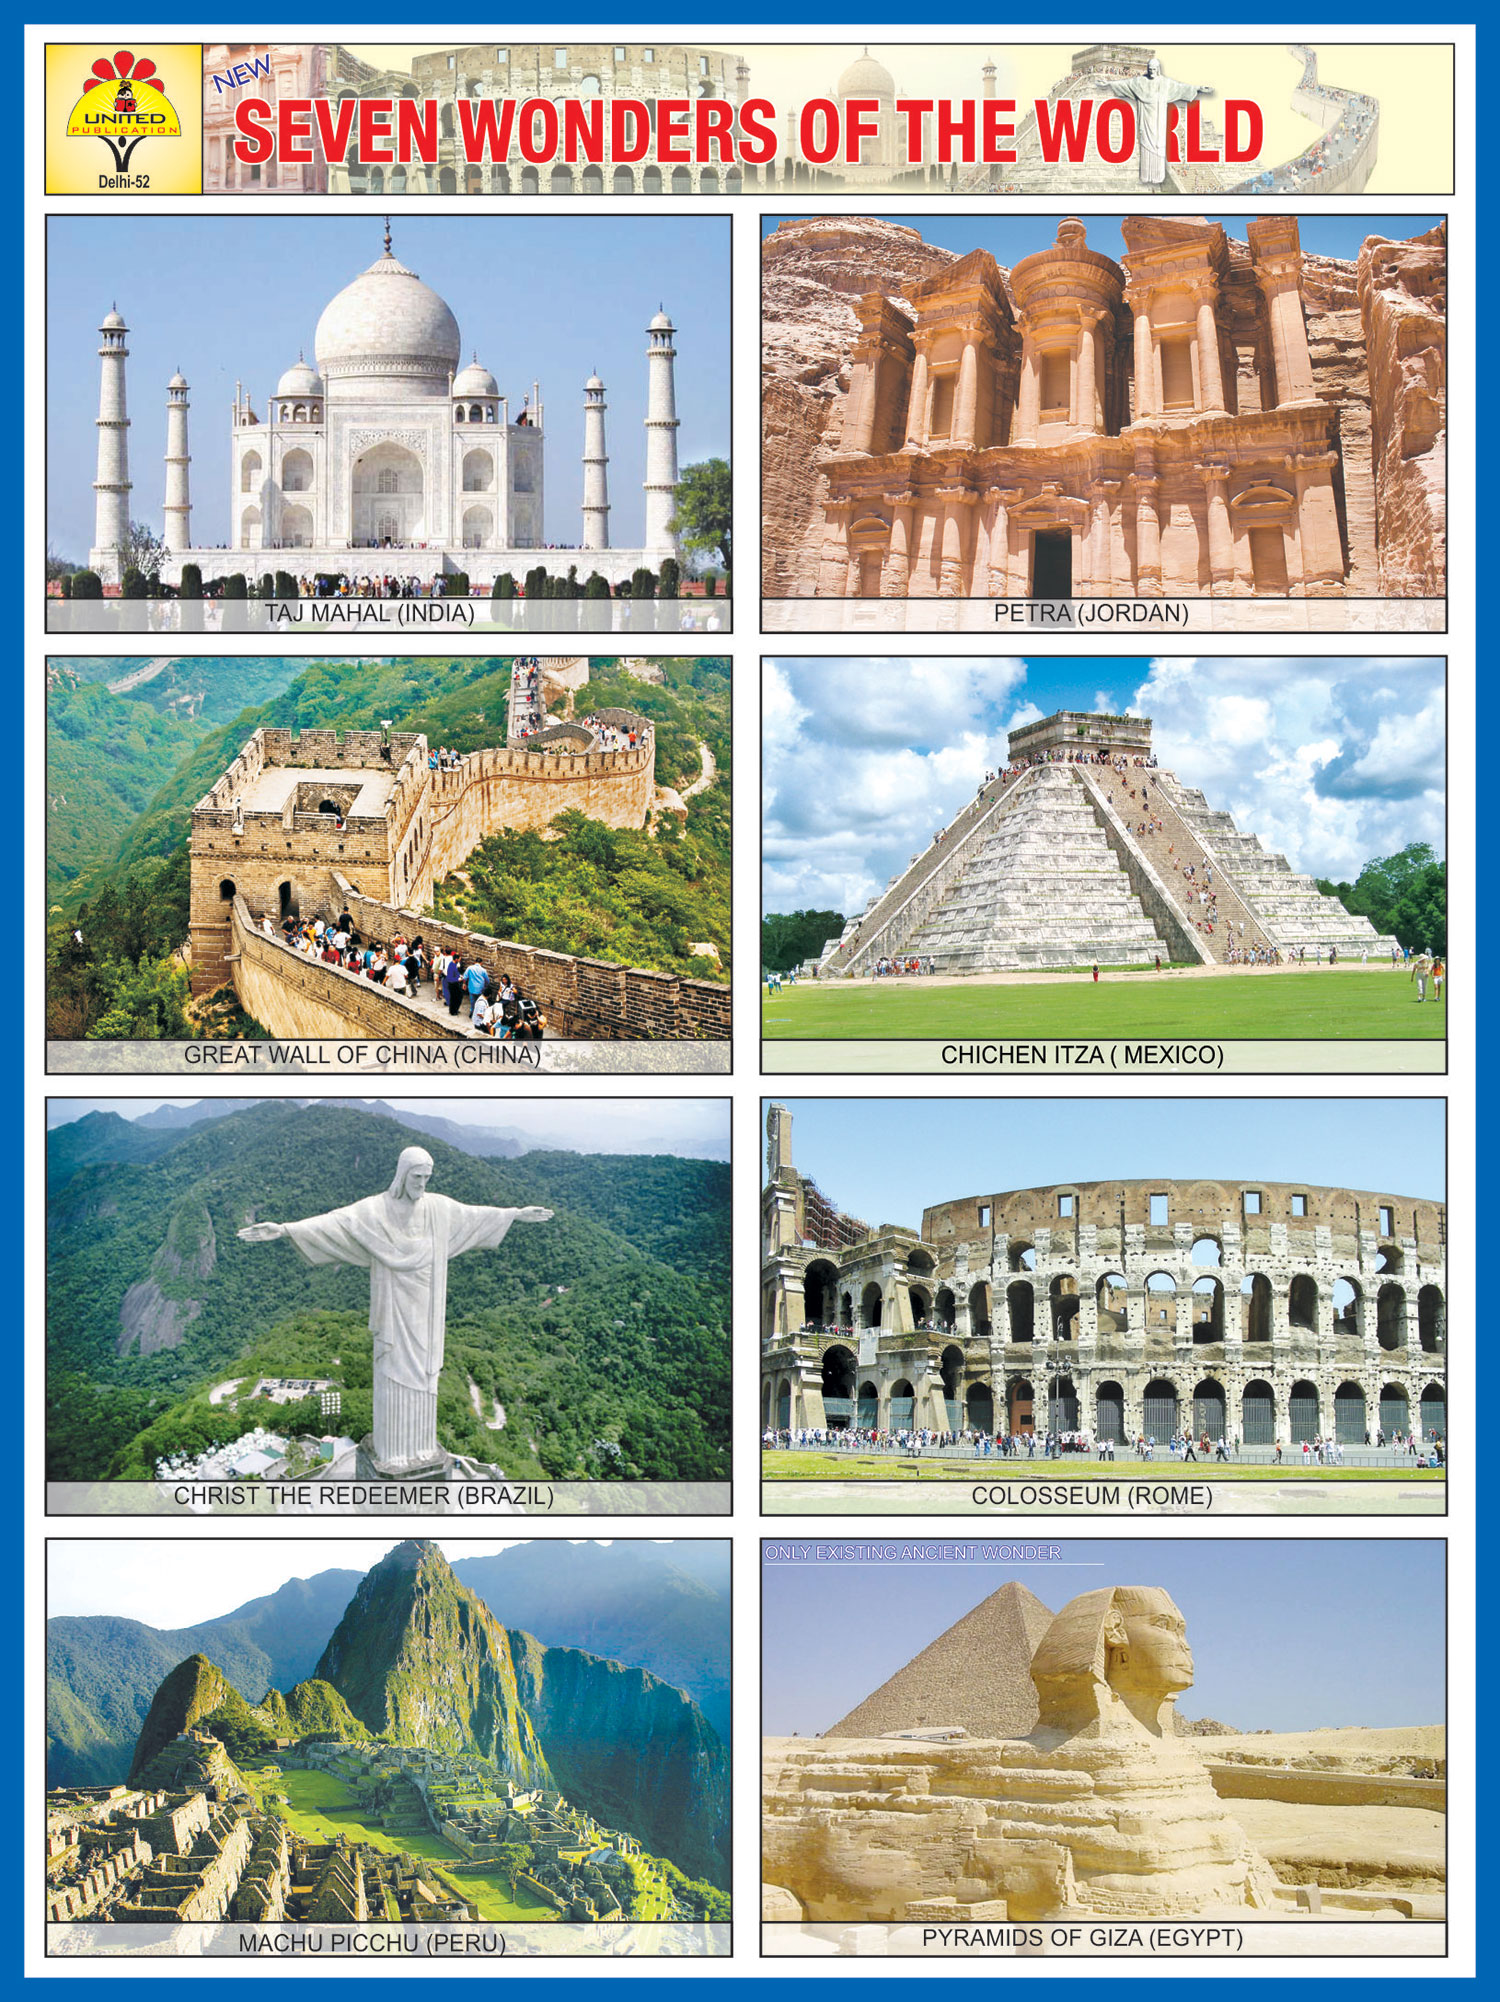 The Seven Wonders of the World names]